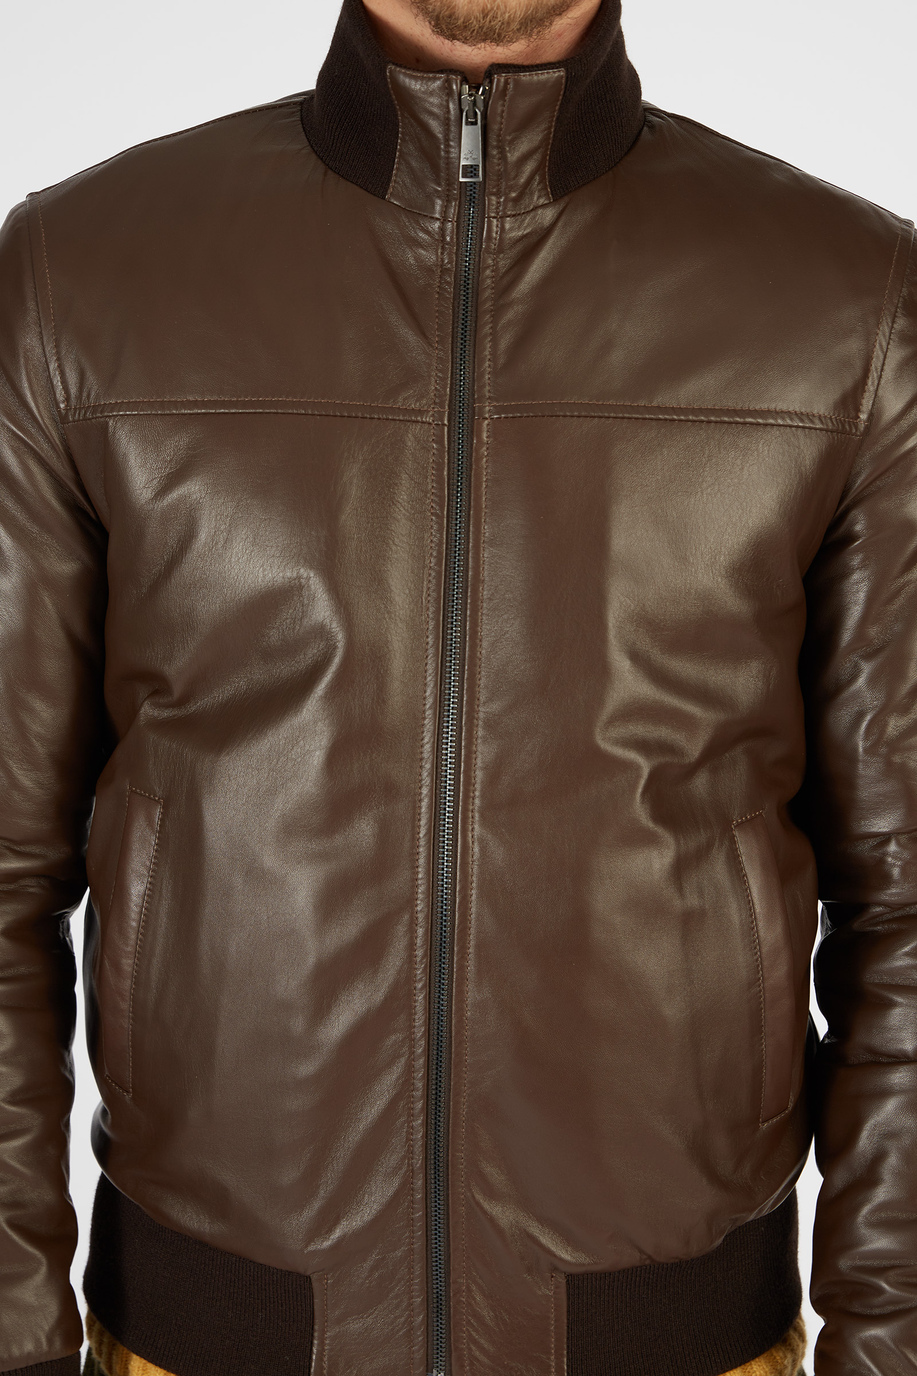 Blue Ribbon leather jacket with regular fit zip front closure - Winter looks for him | La Martina - Official Online Shop